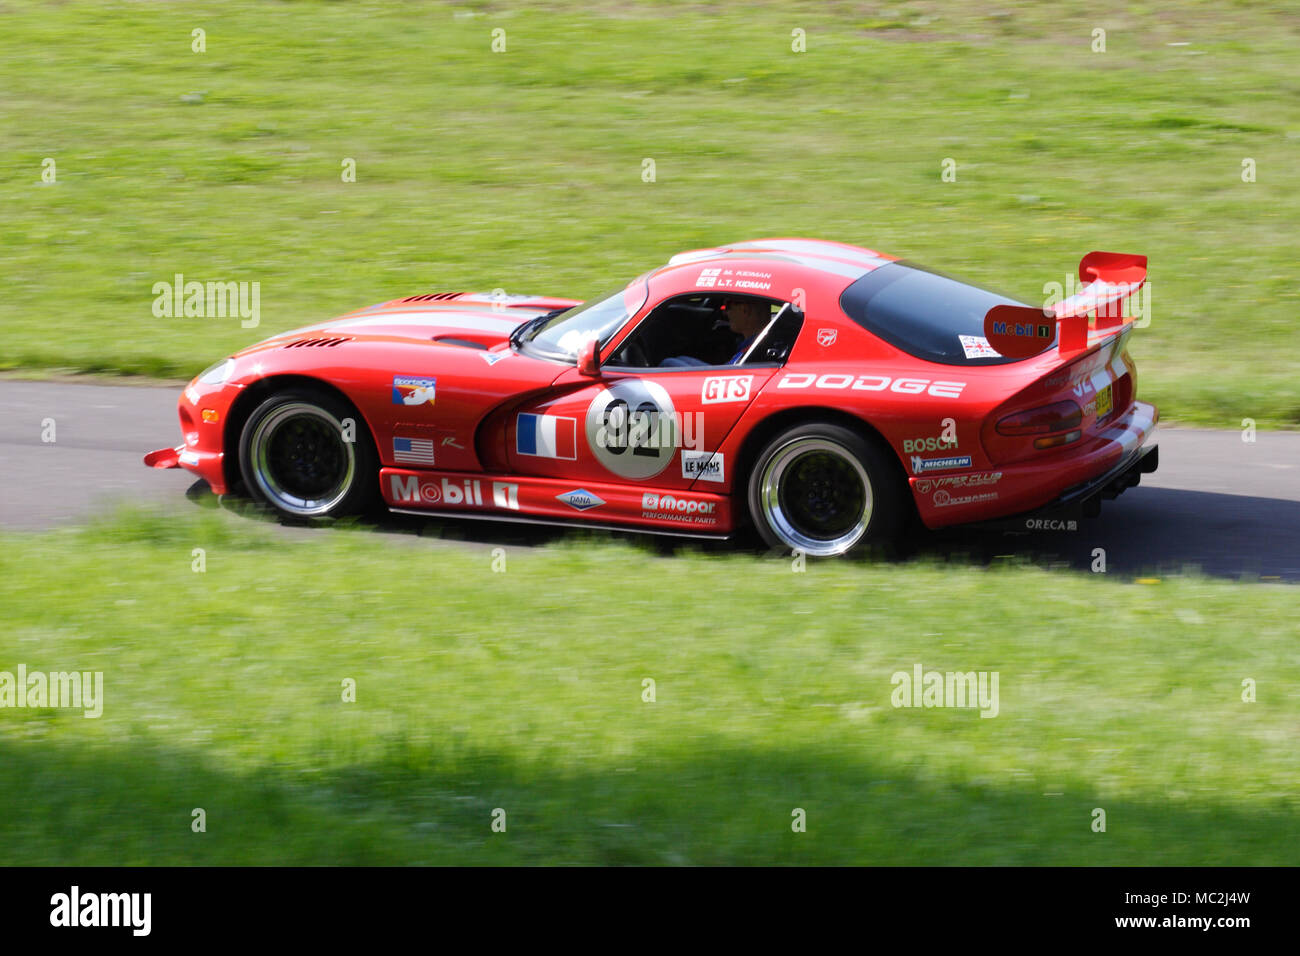 Red Dodge Viper racing car driving fast on a country road. Stock Photo